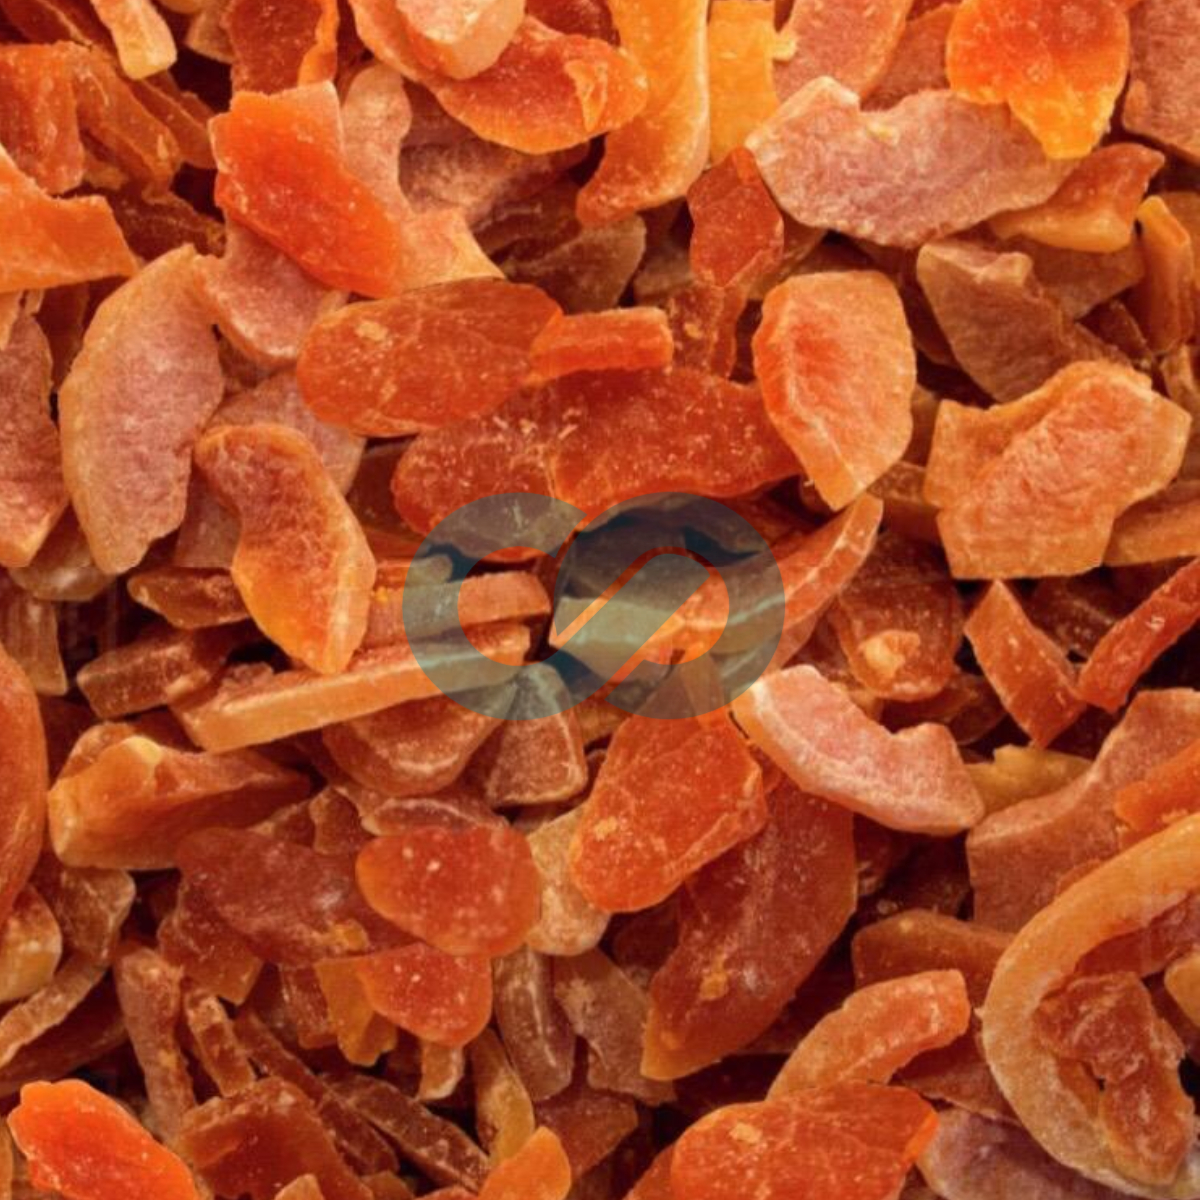 Bringing out our sweet dried Papaya
Origin: Philippines
Get a taste of our dried fruits here!

visit us costucoast.com
WhatsApp: (+63) 917 154 3877
Office@costucoast.com

#dryfruits #musthave #deliciousfood #fruit  #dryfruitsandnuts #dryfruit #dryfruitbox #driedpapaya